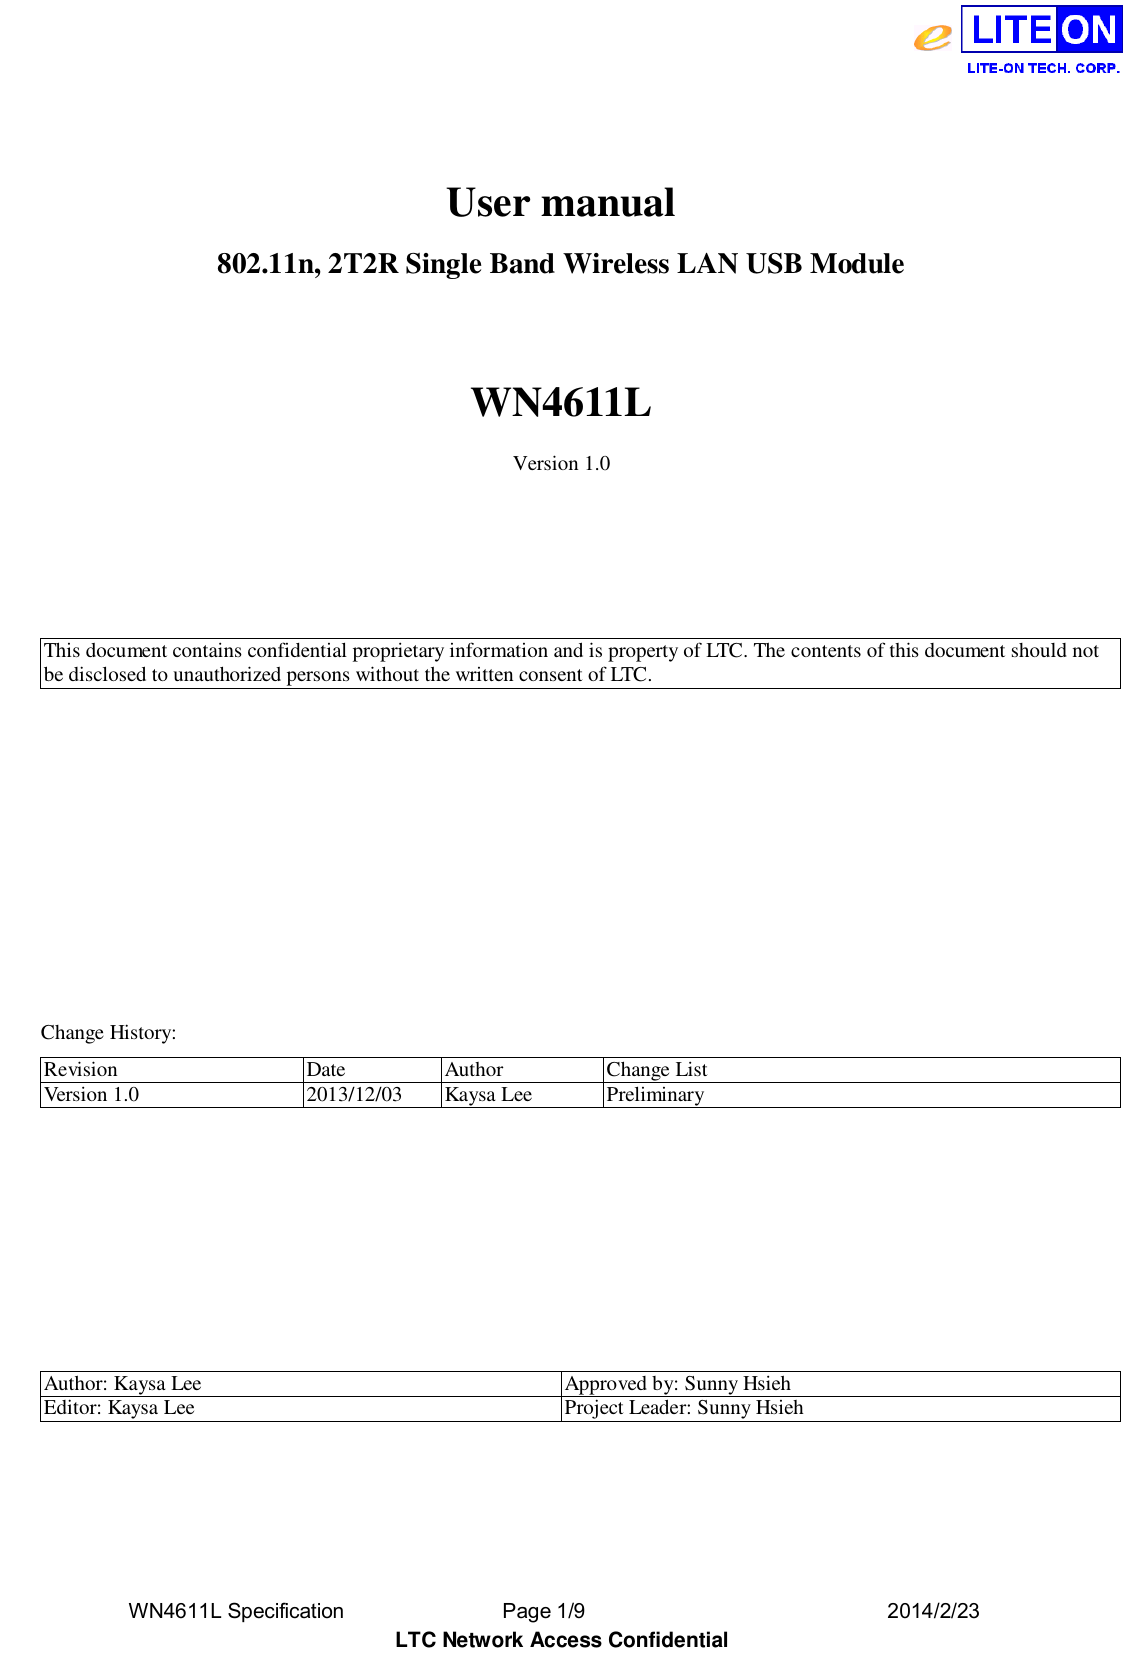  WN4611L Specification               Page 1/9                              2014/2/23 LTC Network Access Confidential                 User manual802.11n, 2T2R Single Band Wireless LAN USB Module  WN4611L Version 1.0     This document contains confidential proprietary information and is property of LTC. The contents of this document should not be disclosed to unauthorized persons without the written consent of LTC.               Change History: Revision Date Author Change List Version 1.0 2013/12/03 Kaysa Lee Preliminary        Author: Kaysa Lee Approved by: Sunny Hsieh Editor: Kaysa Lee Project Leader: Sunny Hsieh   